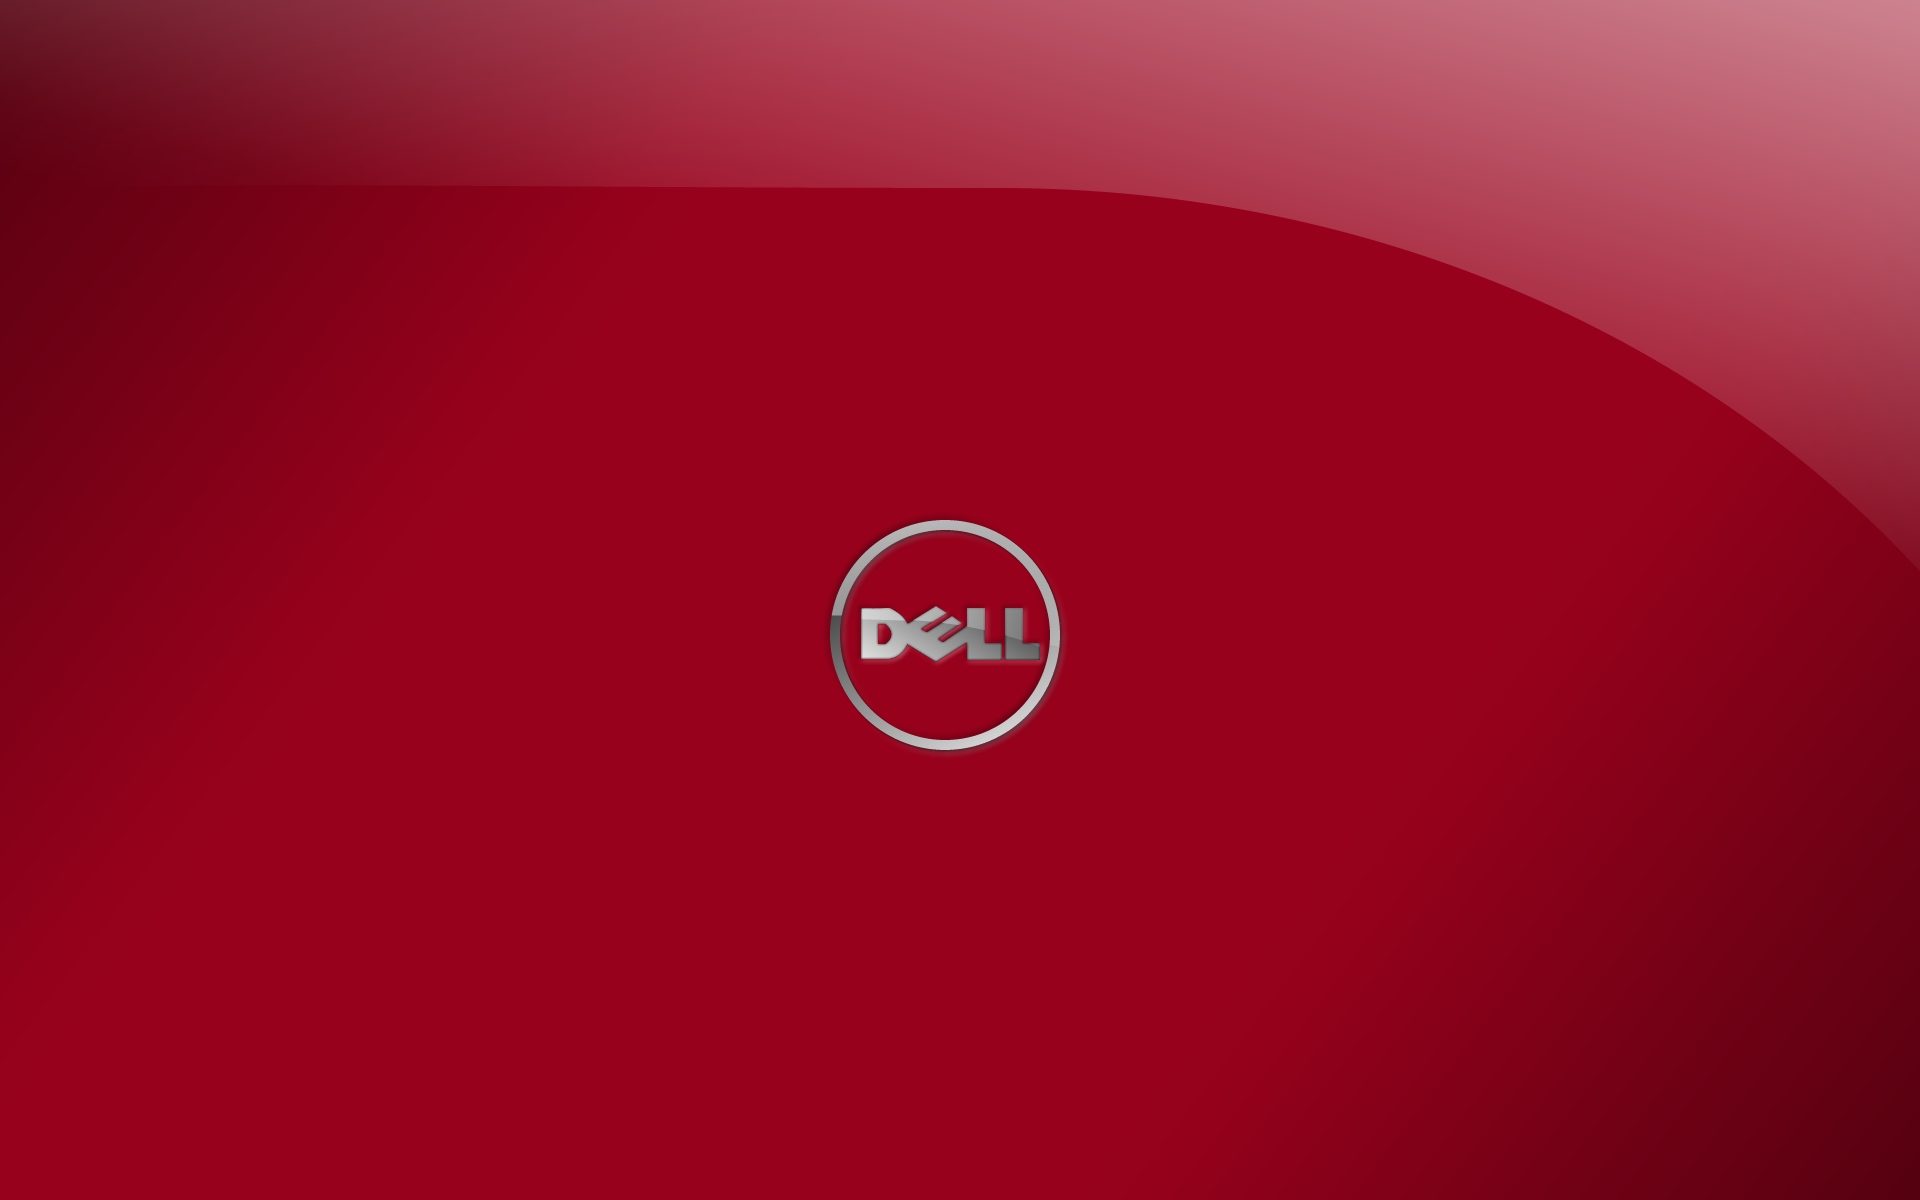 dell red color logo wallpaper hd backgrounds for mobile and pc free